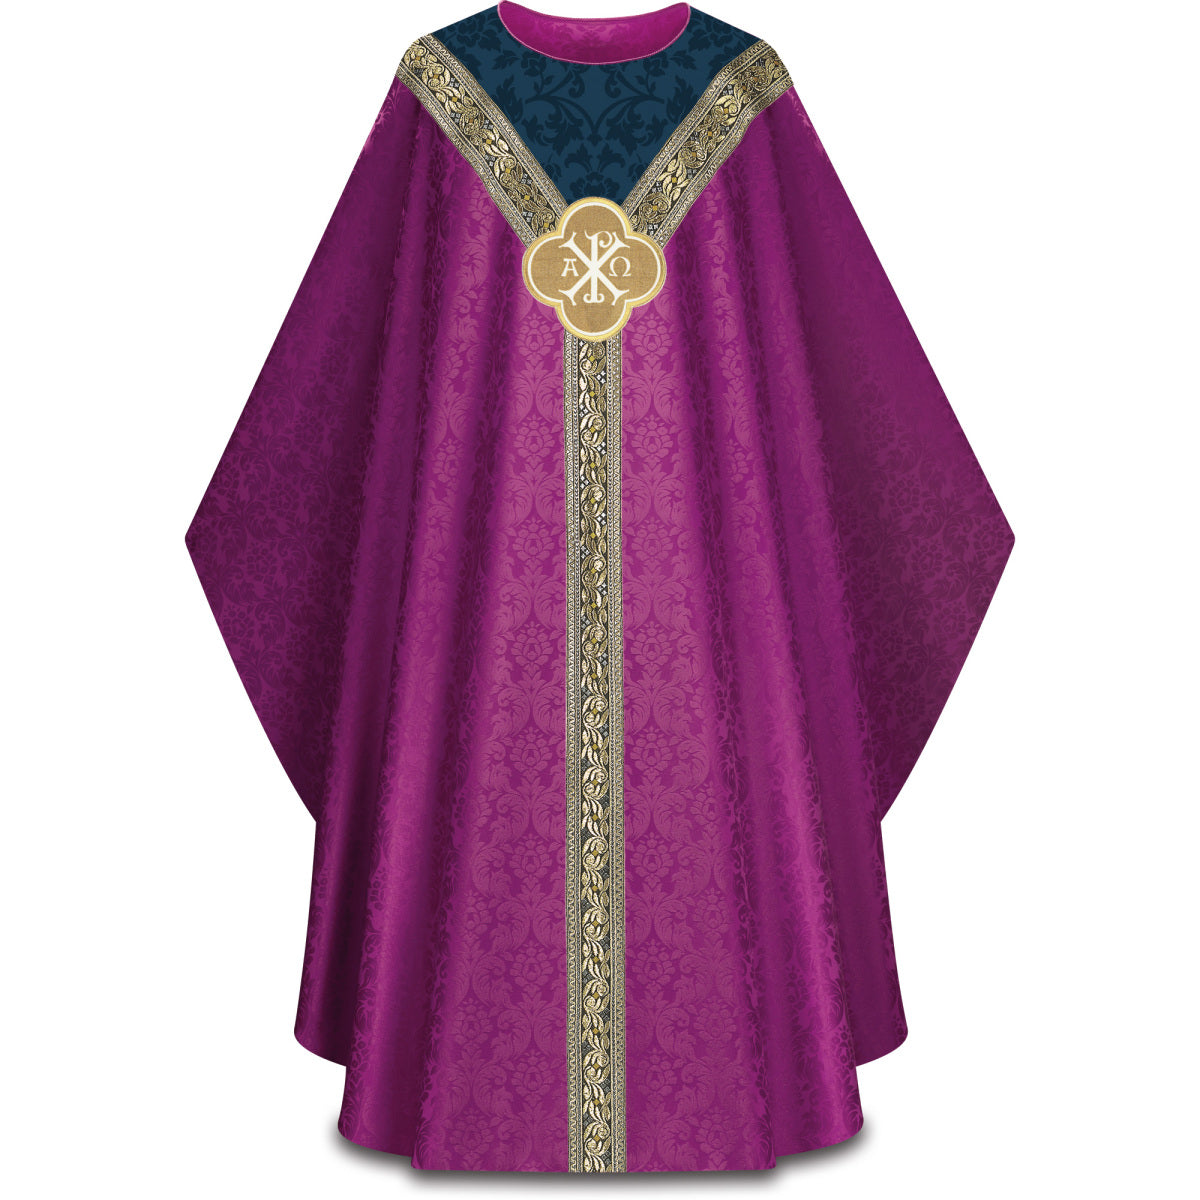 Chasuble in Damask Fabric with Woven Orphrey